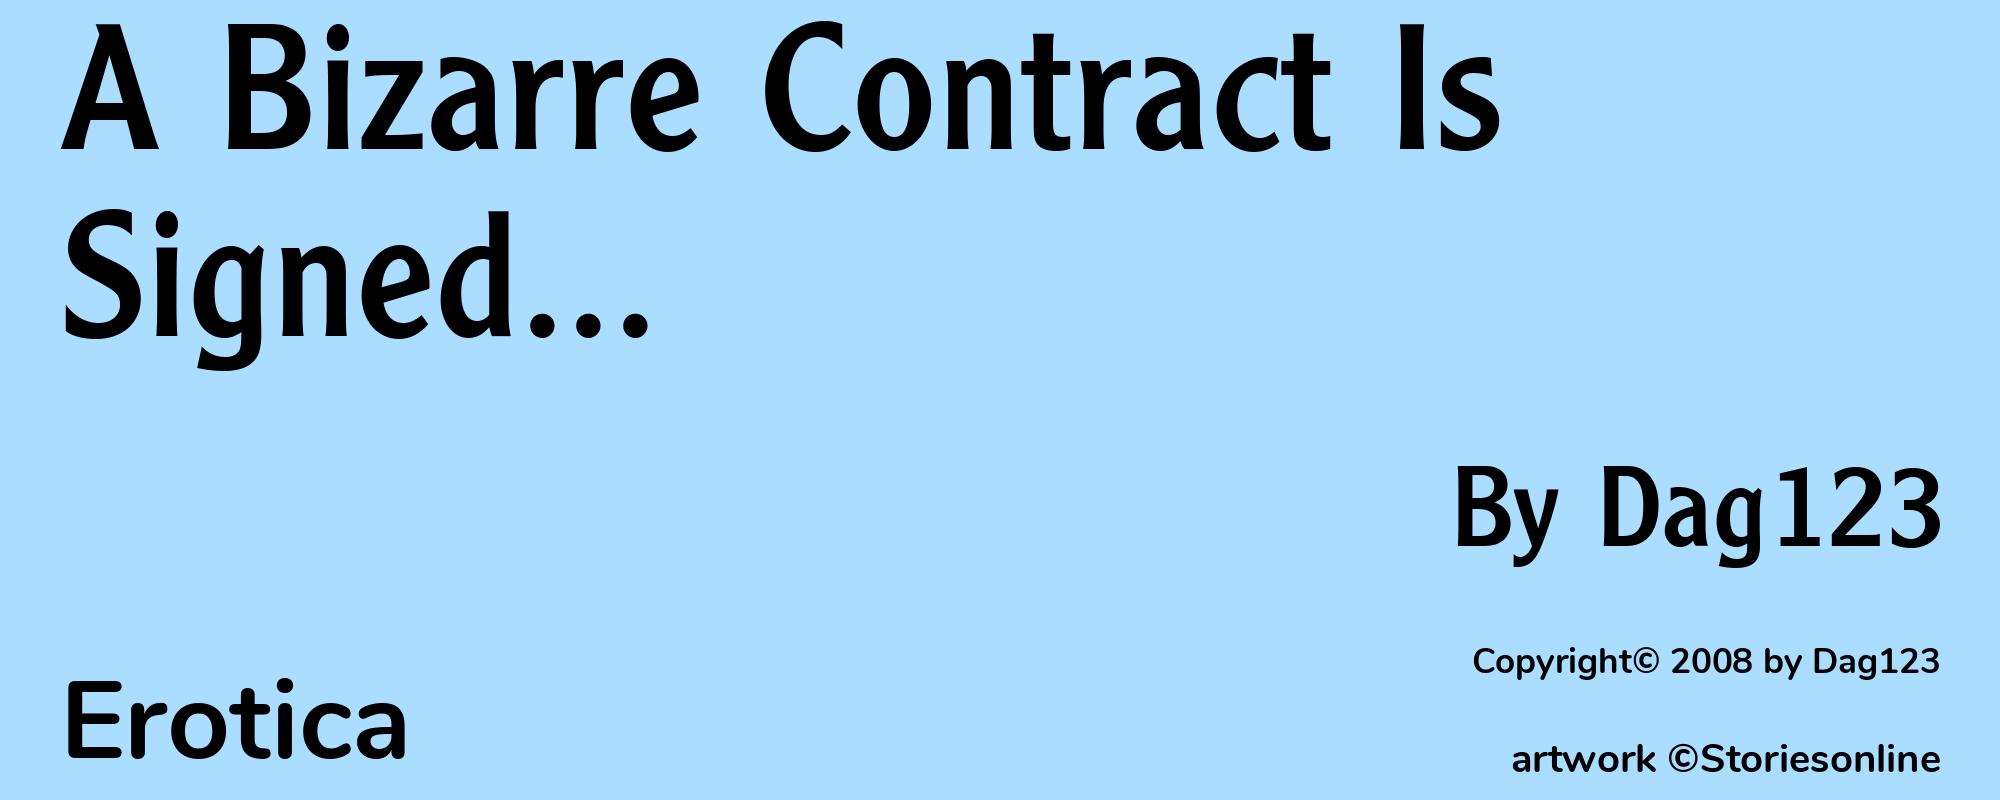 A Bizarre Contract Is Signed... - Cover